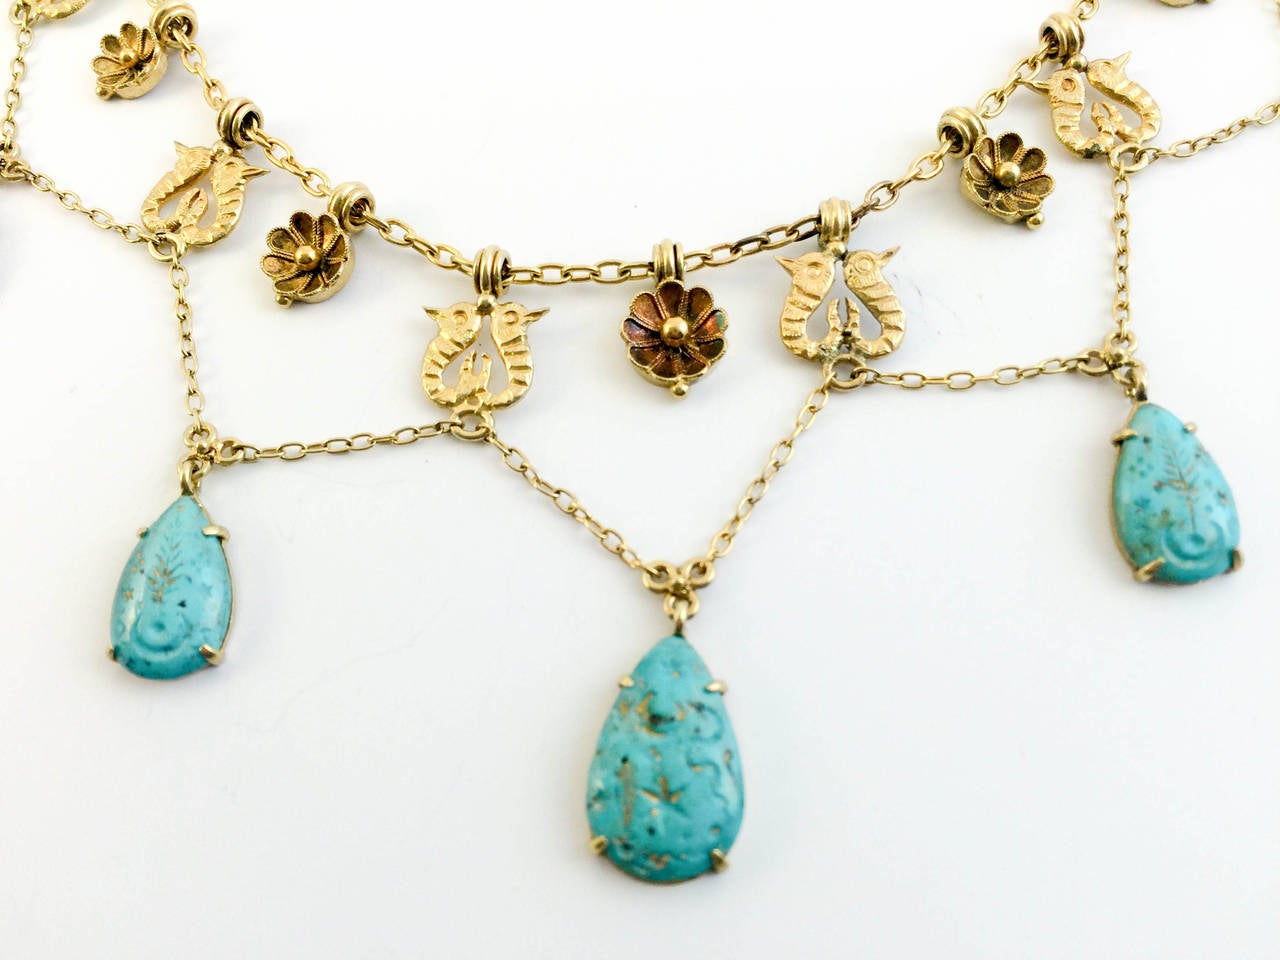 Turquoise and Gold Necklace - 1920s In Good Condition In London, Chelsea